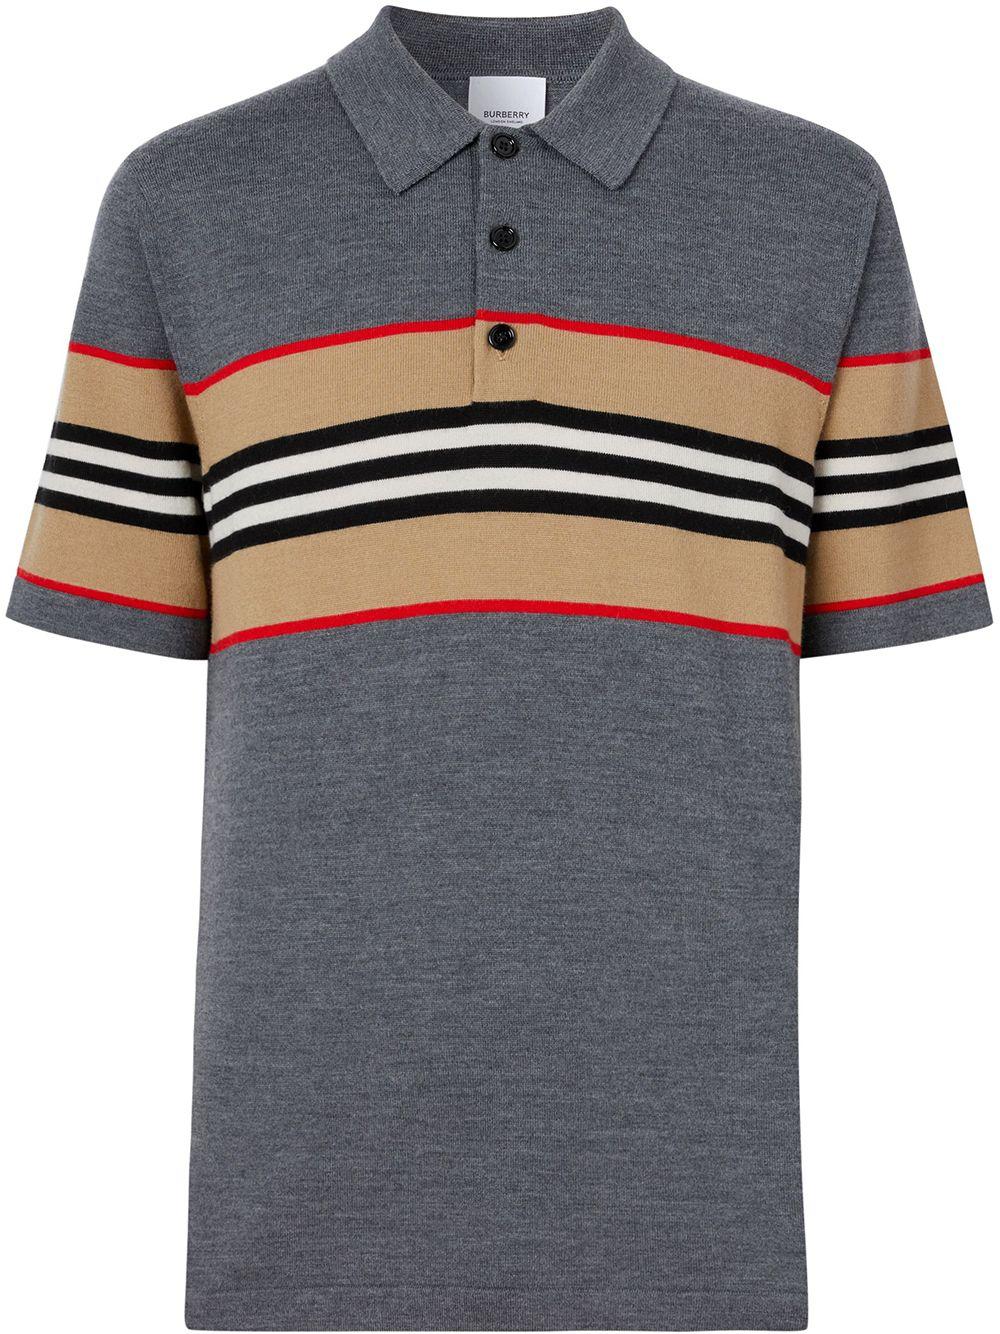 Burberry Wool Icon Stripe Polo Shirt in Grey (Gray) for Men - Lyst